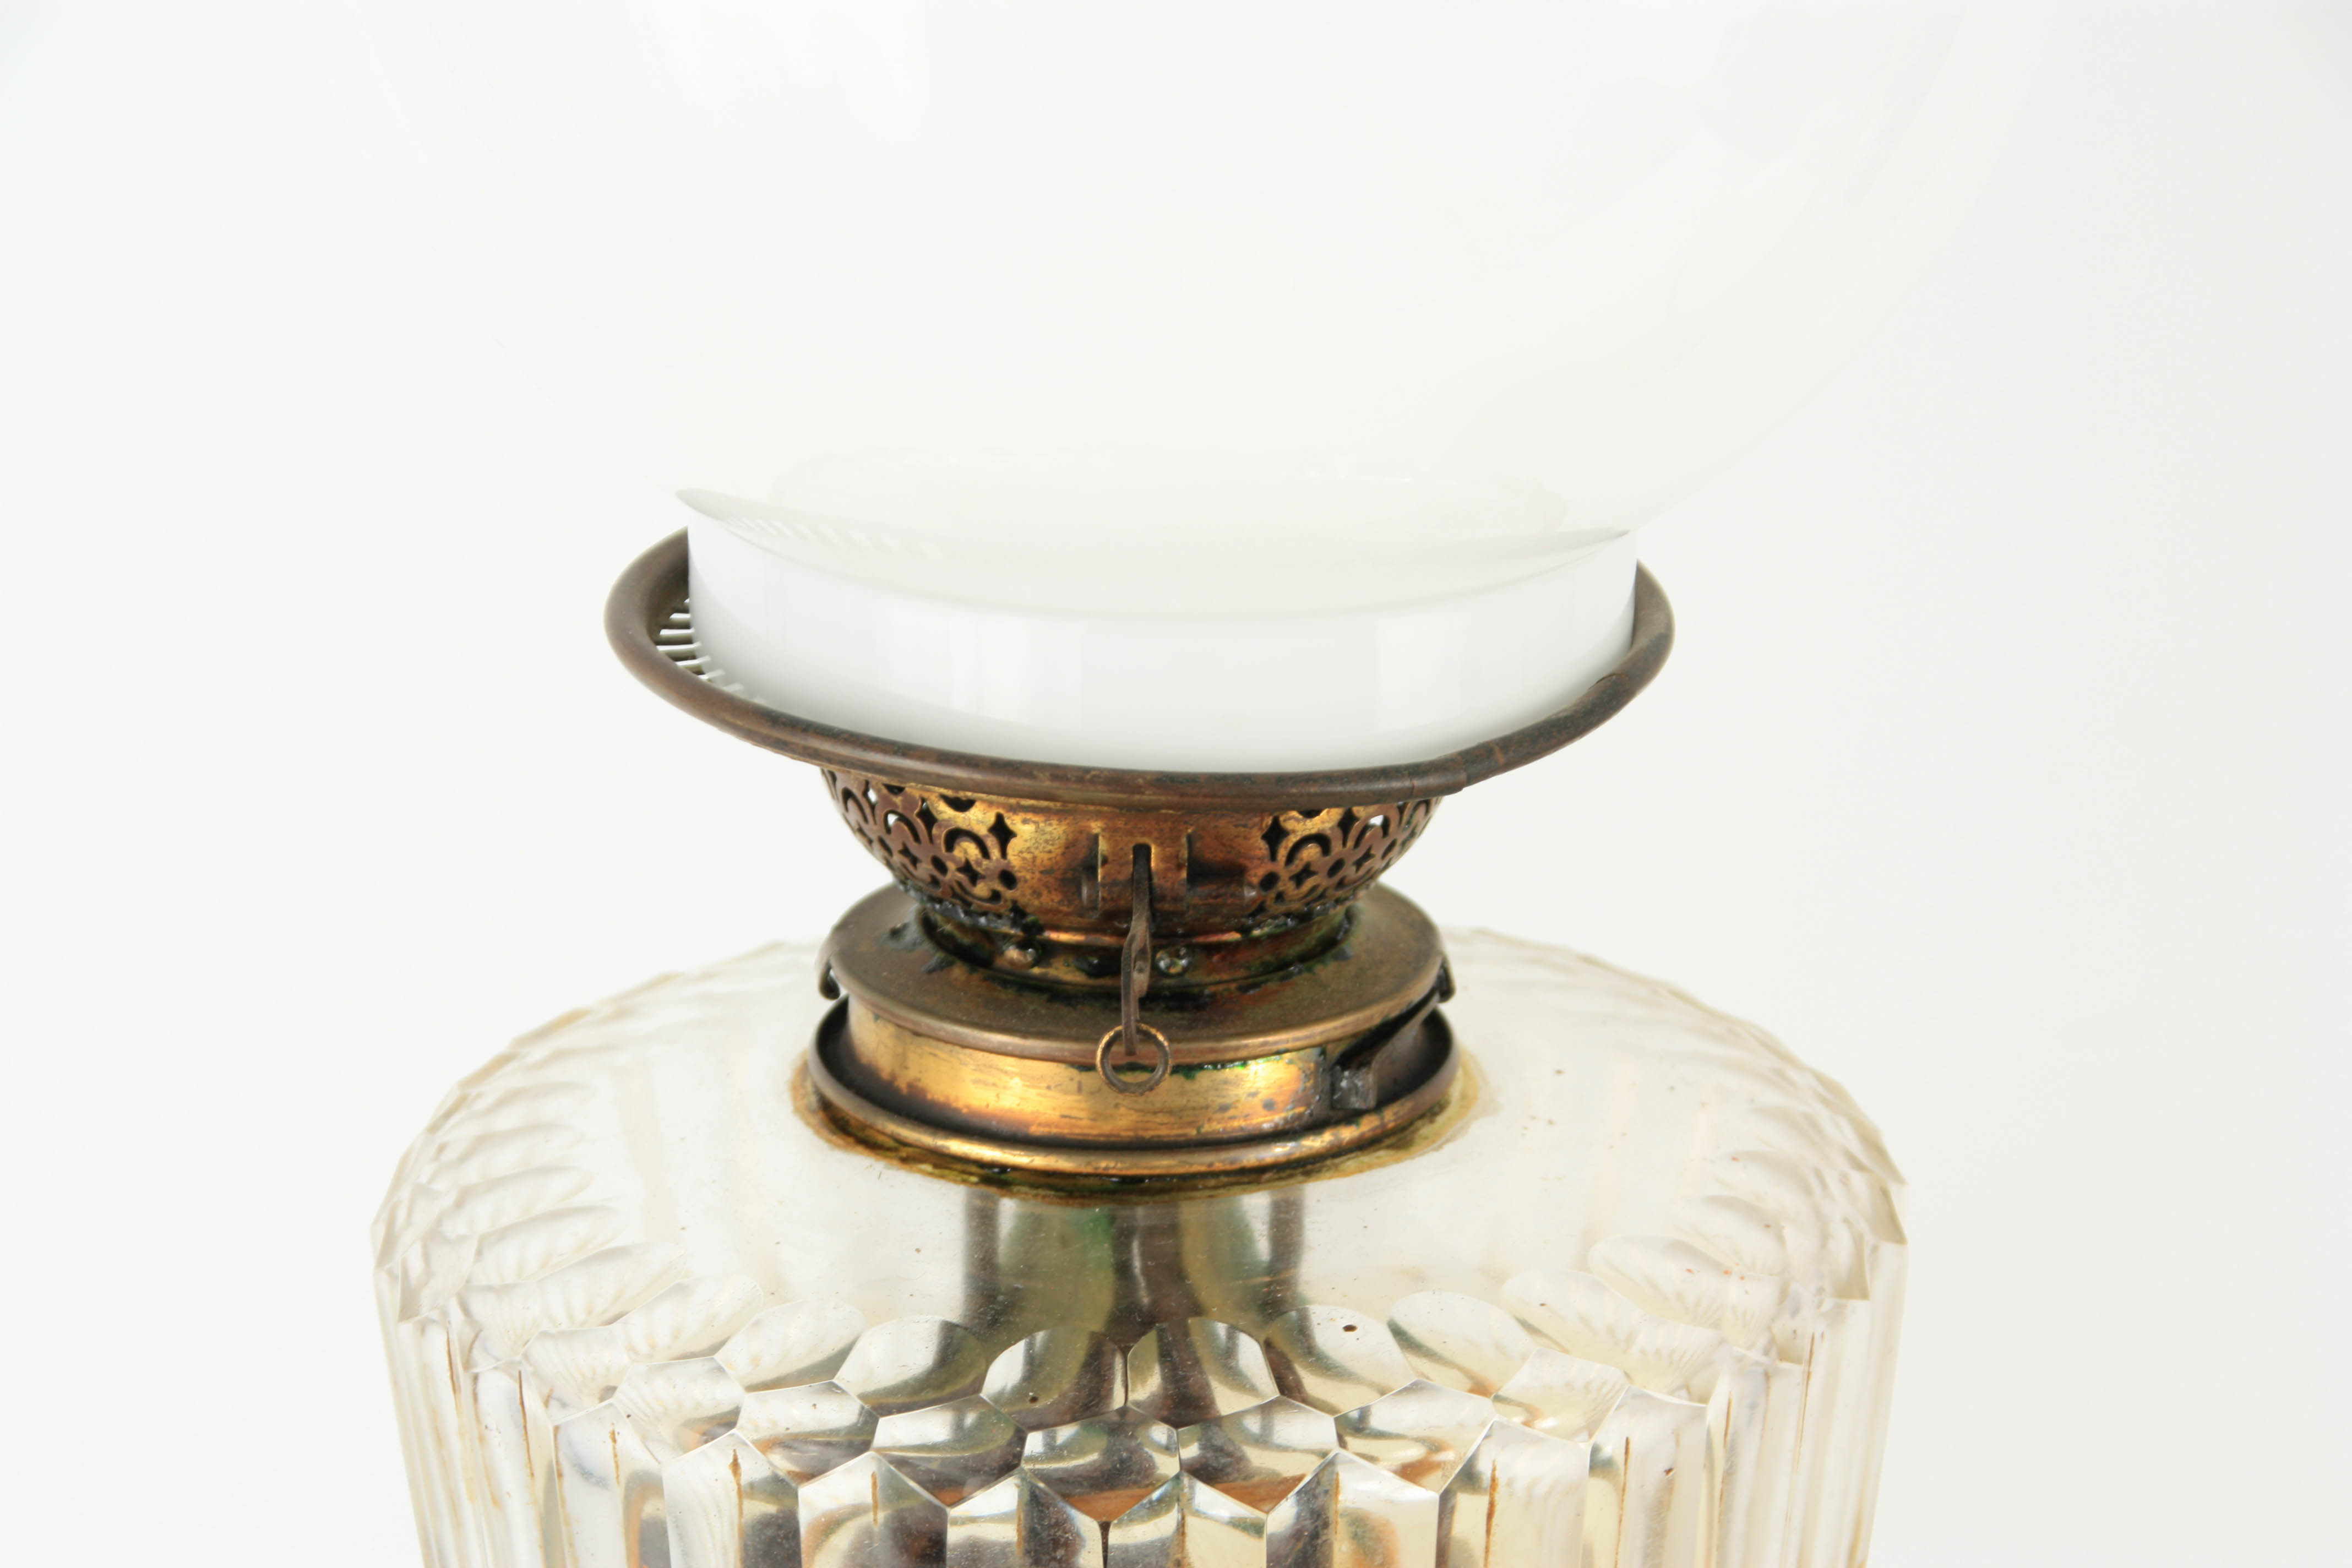 A VICTORIAN ORNATE CAST BRASS OIL LAMP with square footed pierced base, reeded leaf cast stem and - Image 4 of 5